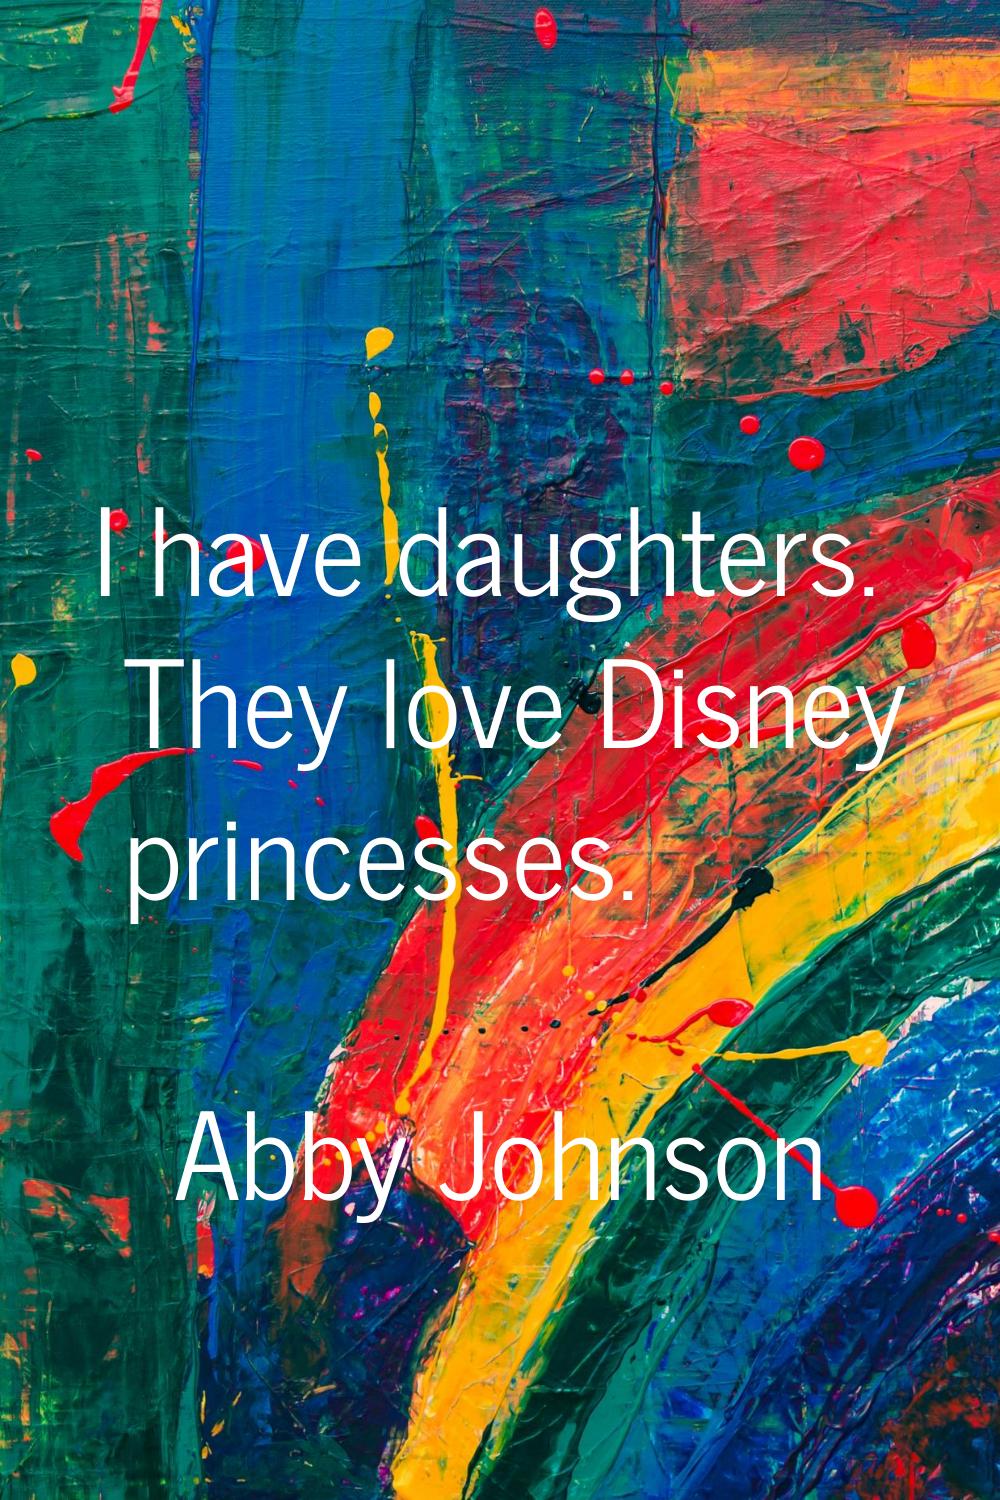 I have daughters. They love Disney princesses.